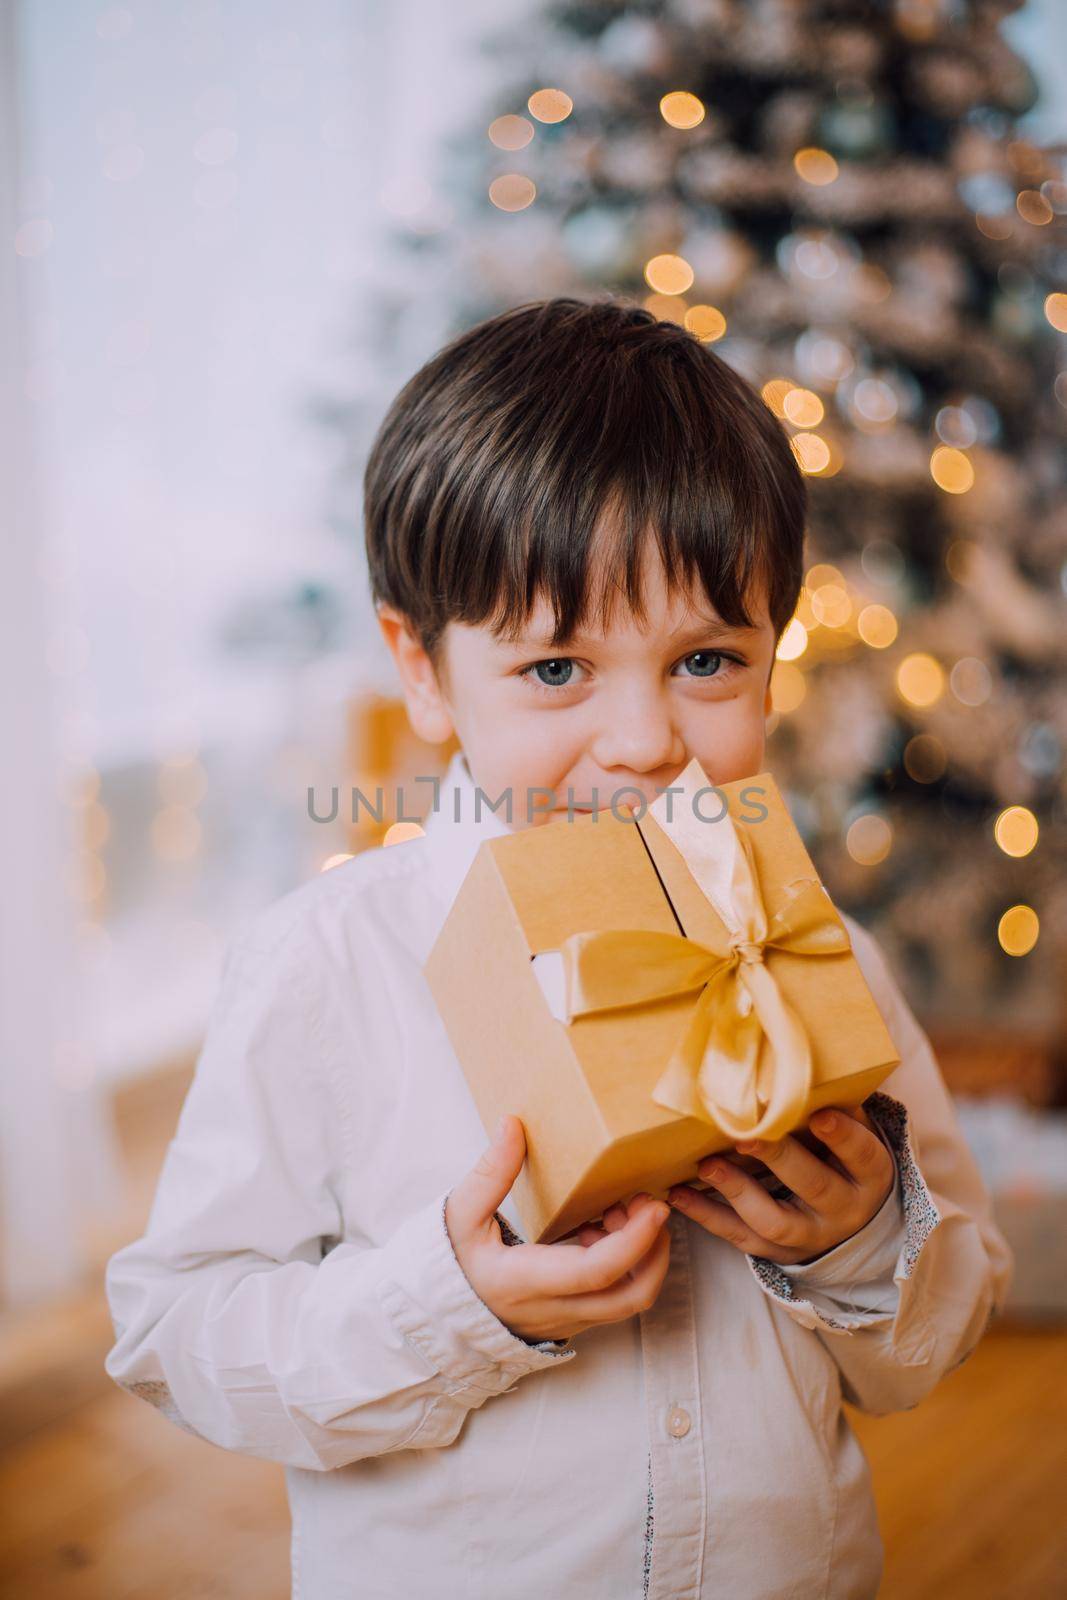 A boy with a New Year's gift under the tree lifestyle. New Year and Christmas. Festive decoration. New Year's gift